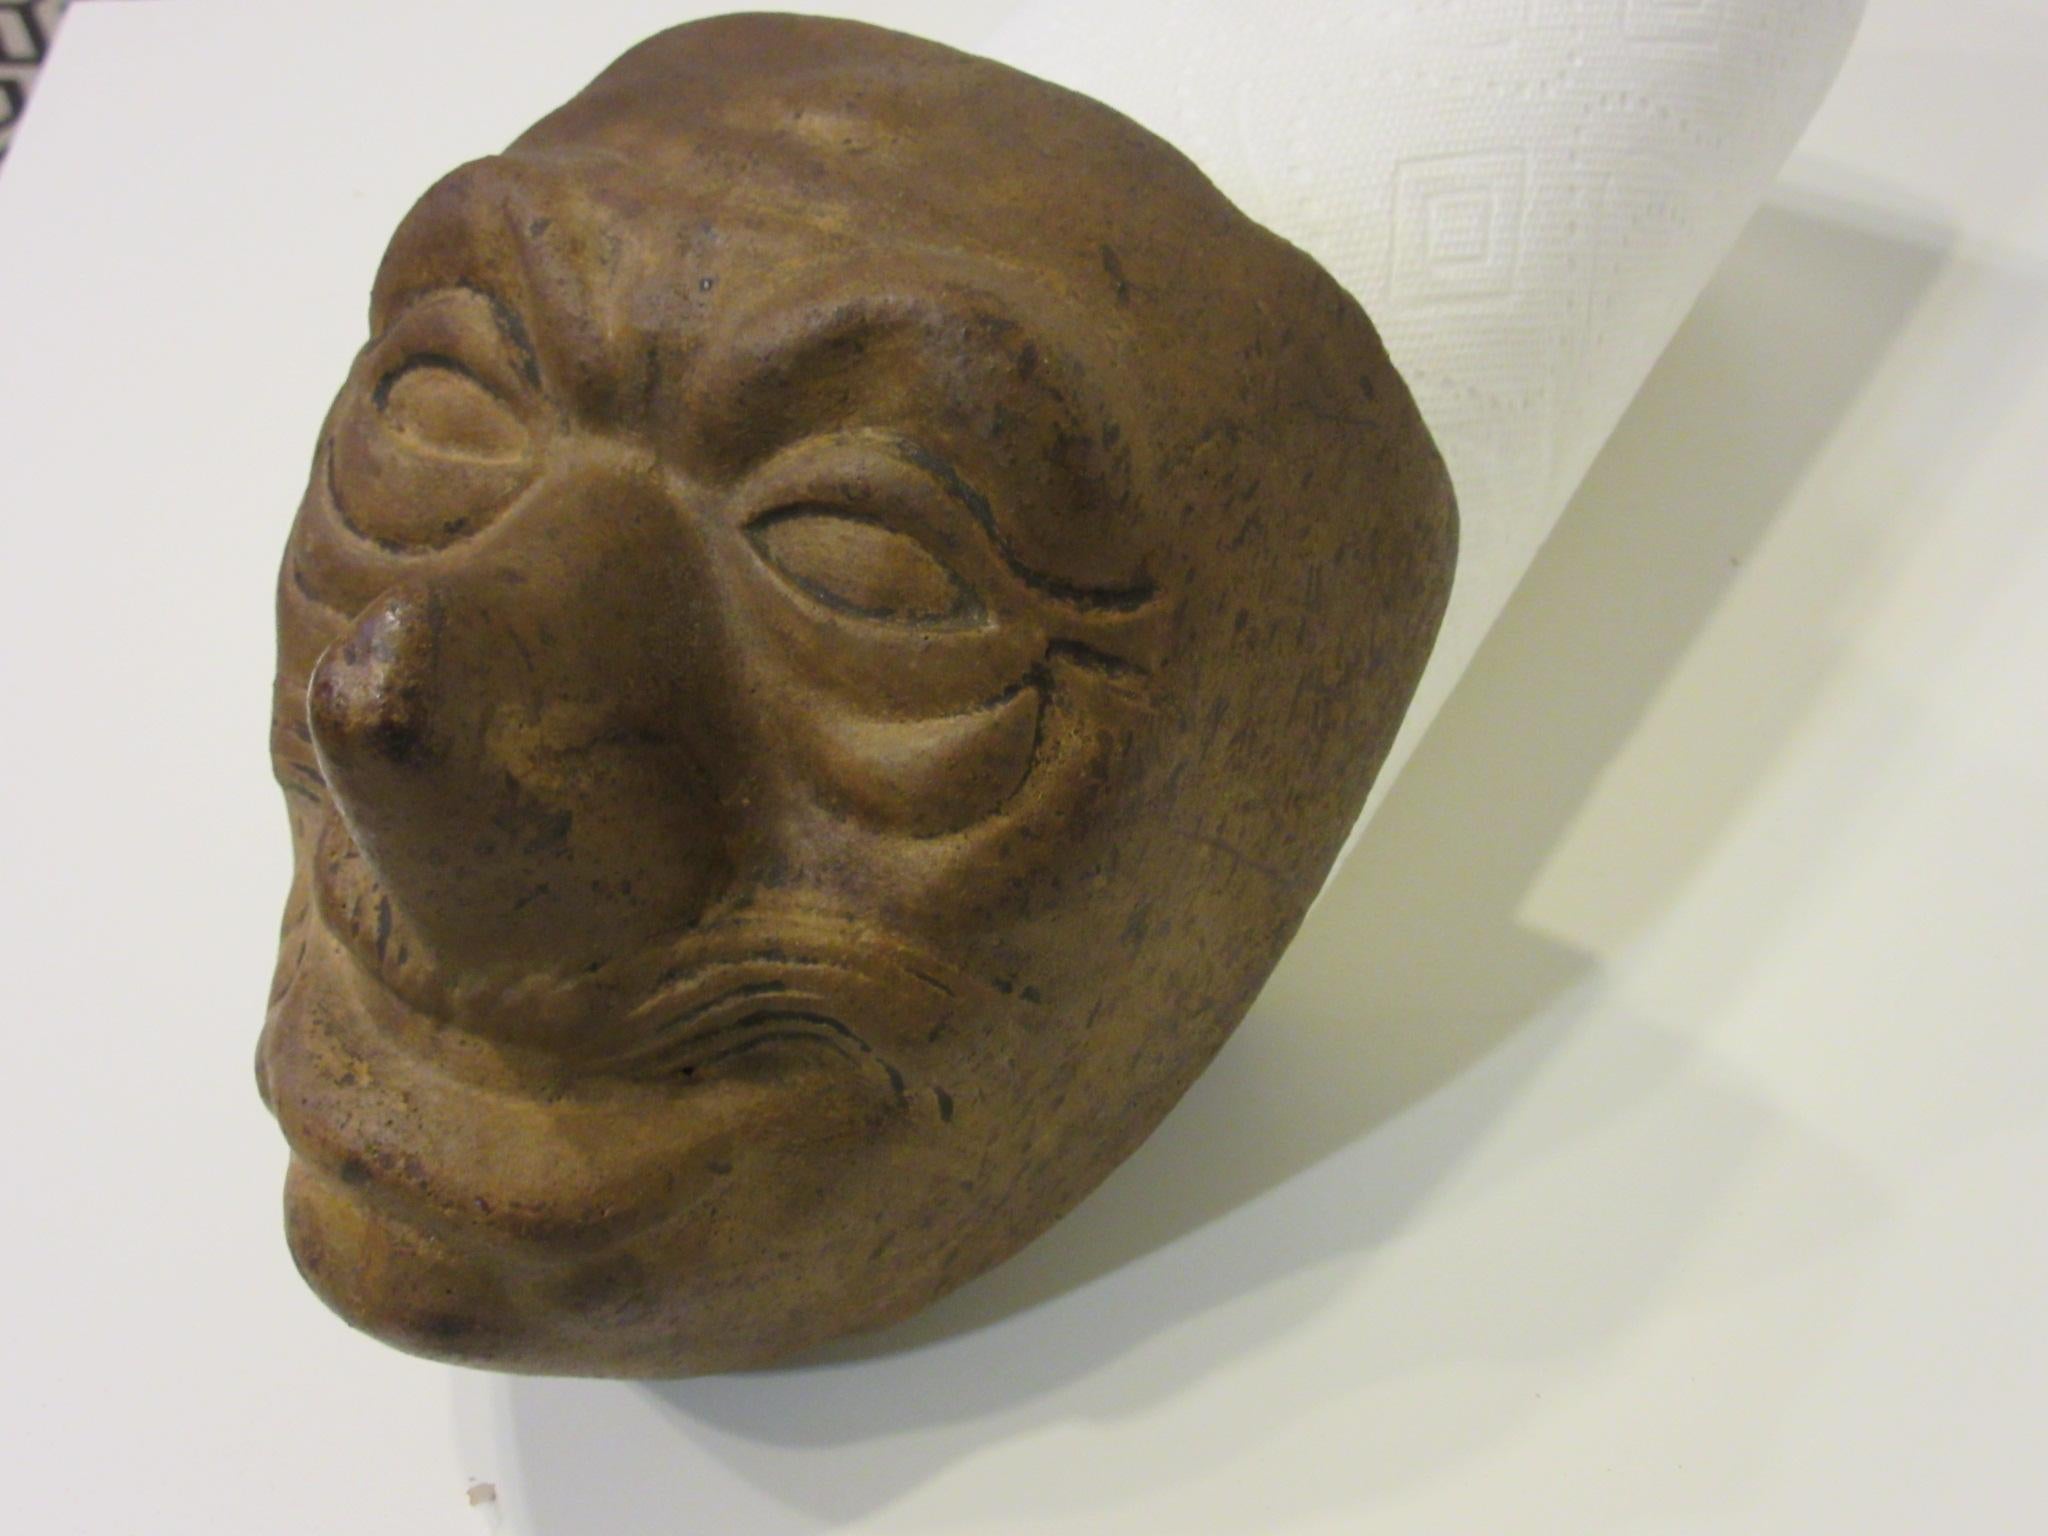 A handcrafted 1920s fired brick mask mold used in making gauze styled Halloween masks by wrapping the mold, hand painting the face and waxing the front and back after drying to set the piece for wearing. This was an early method in mask making and